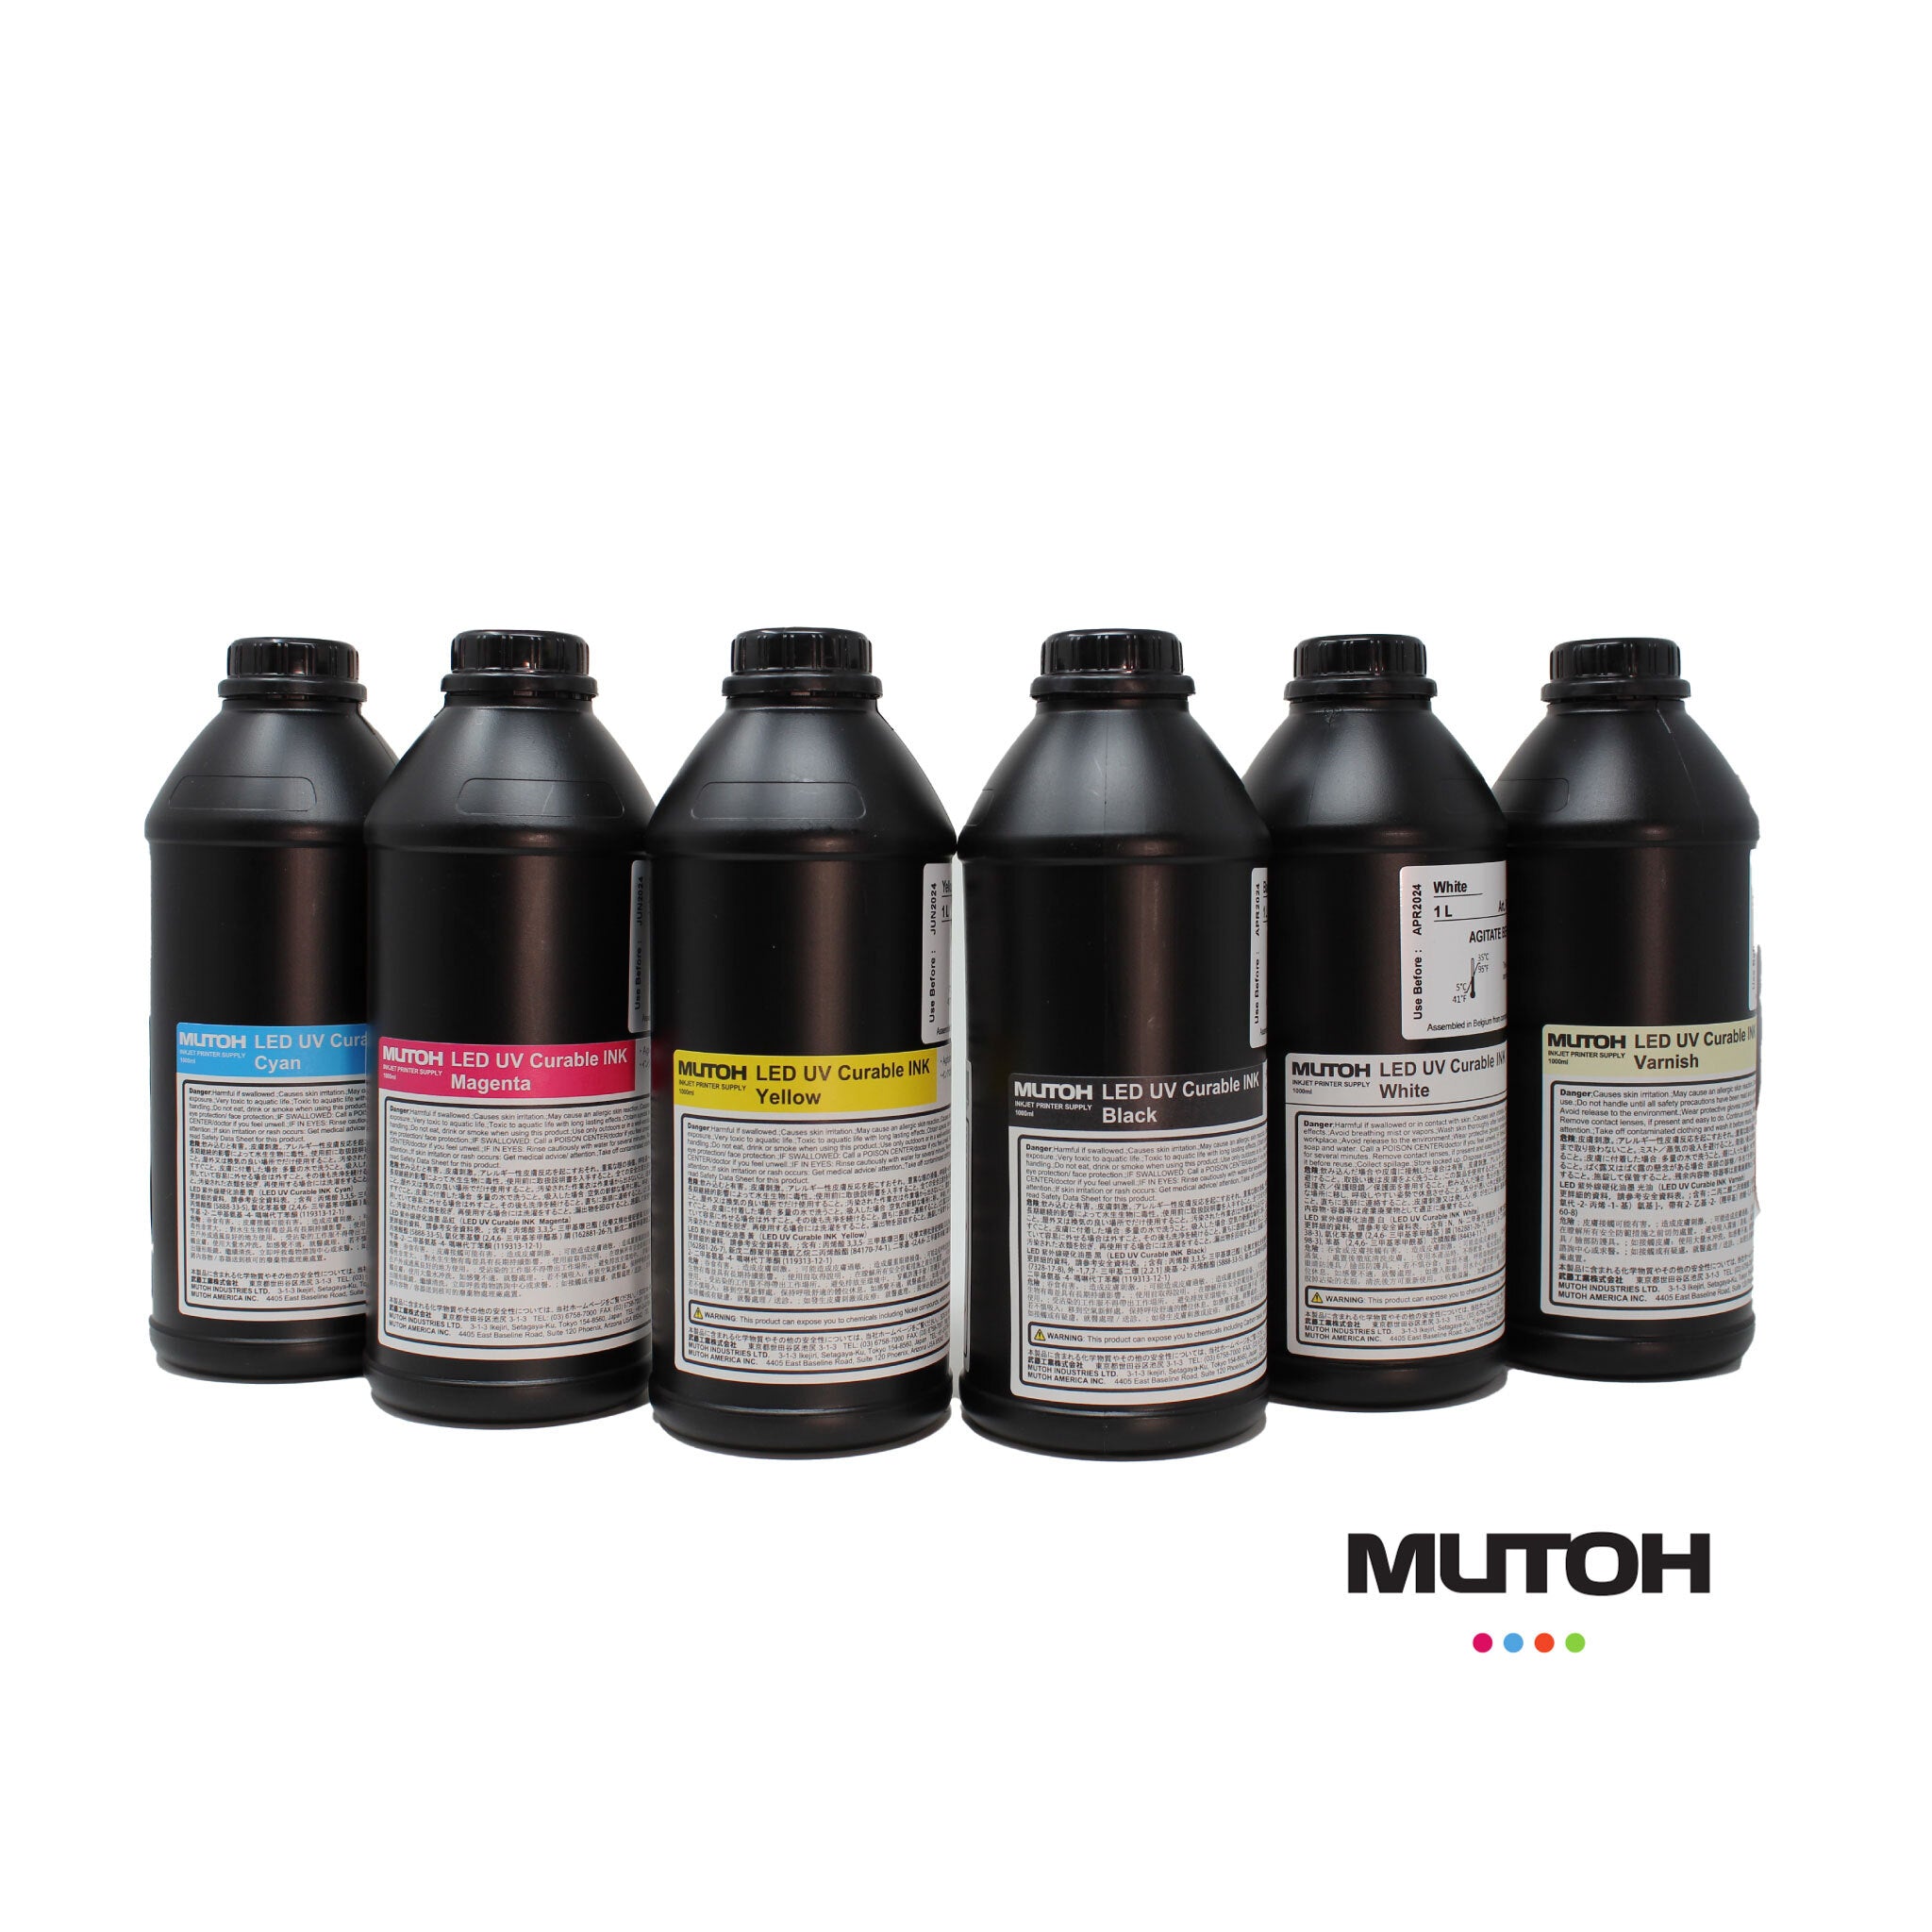 Mutoh LED UV Curable ink G5 set